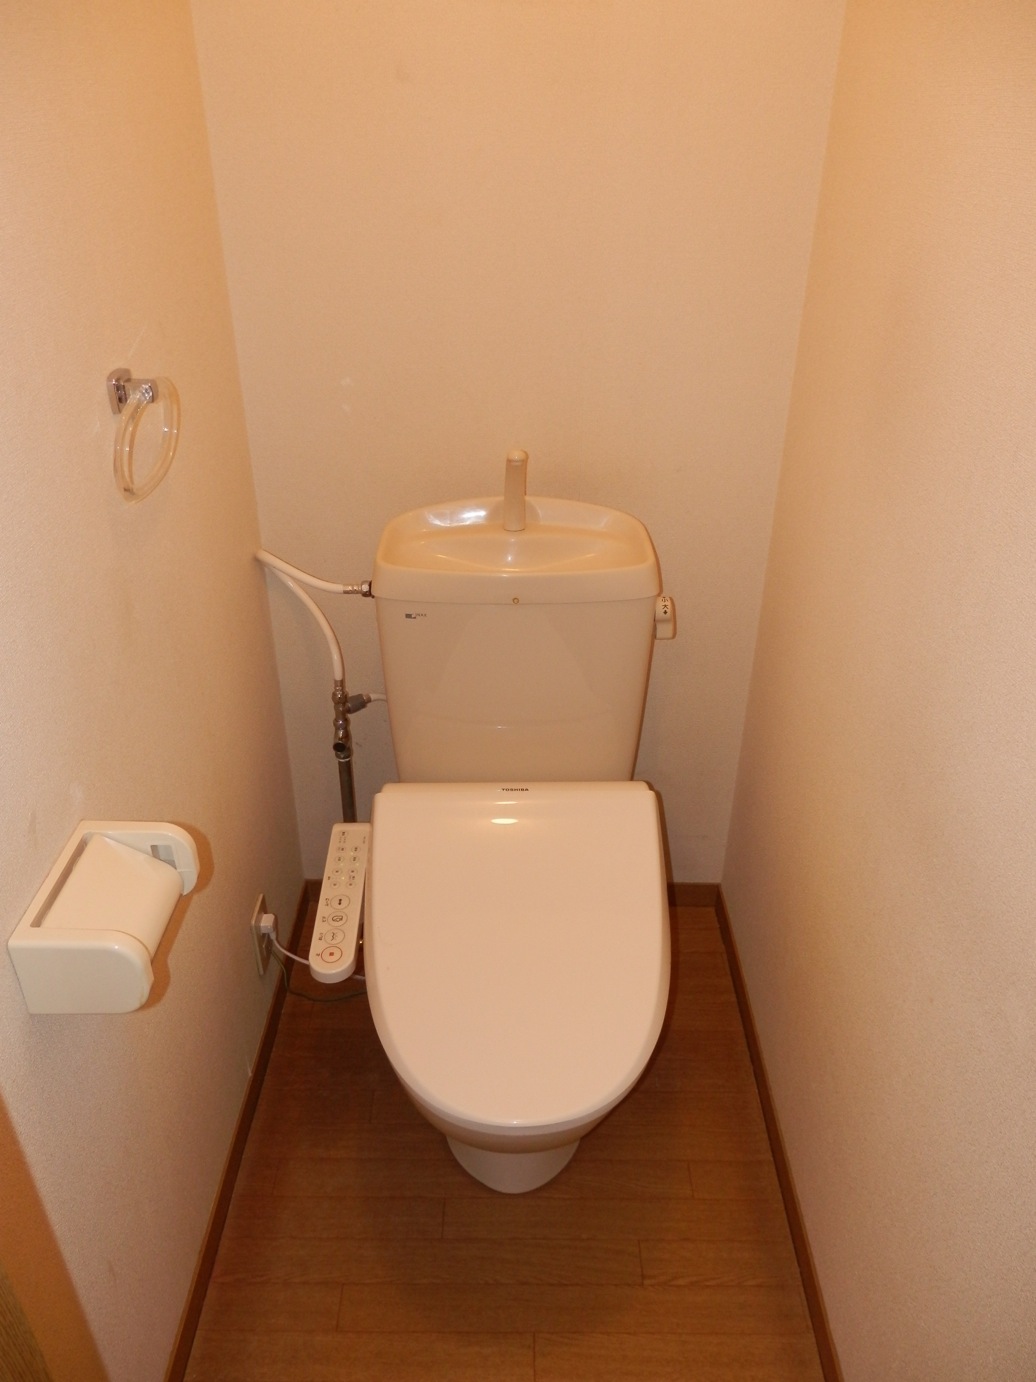 Toilet. It is with cleaning function